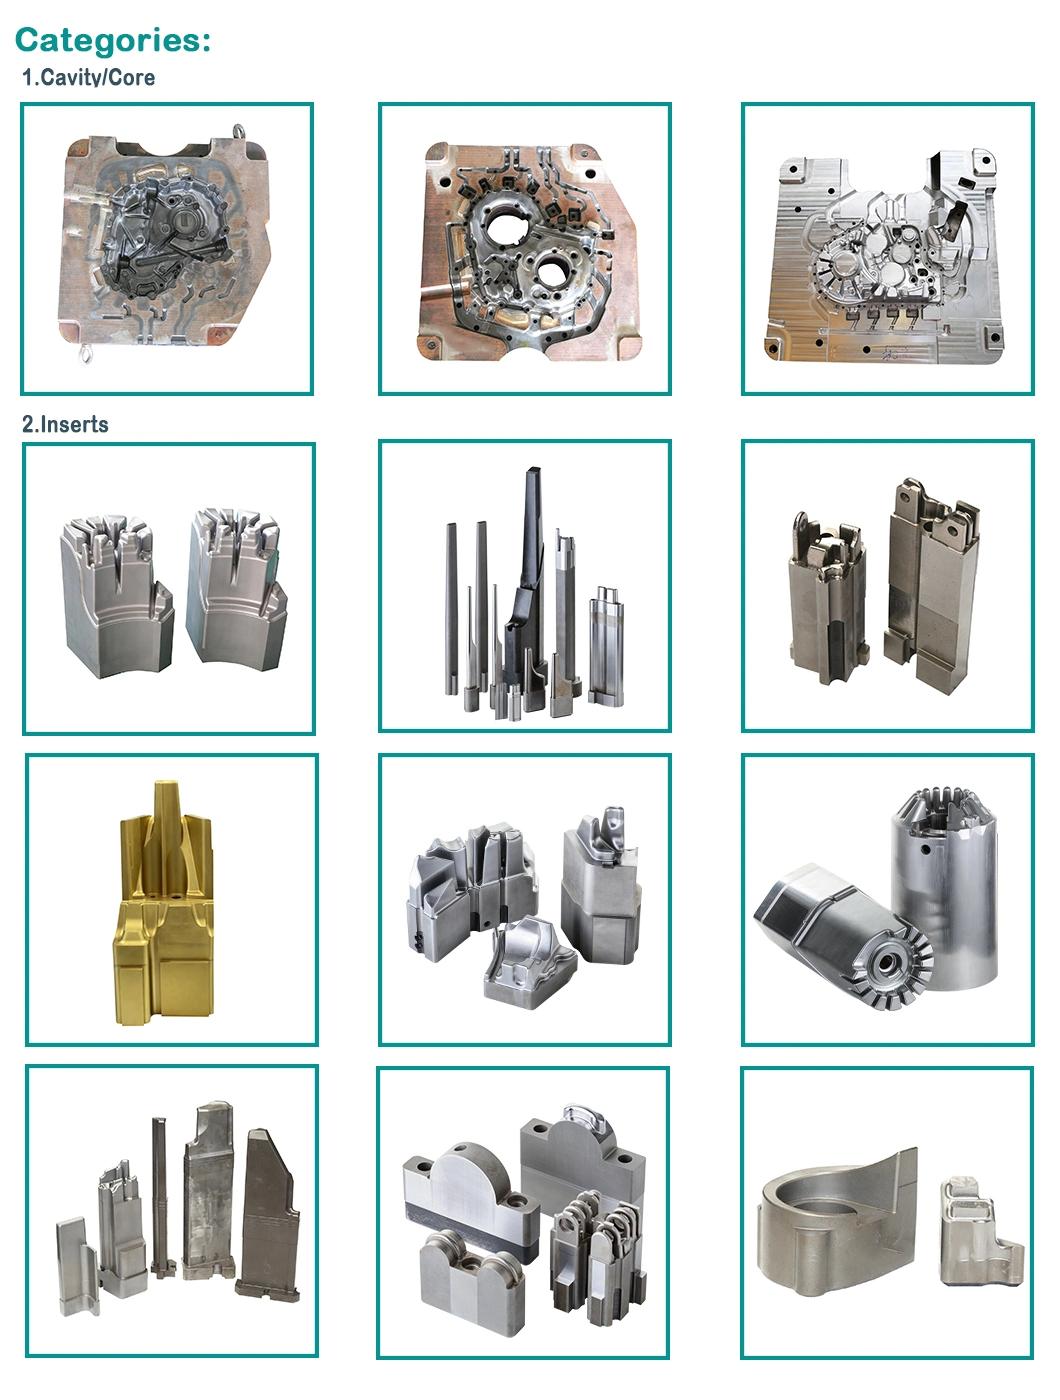 Standard Custom Mold Componnets Plastic Mold Components Die Casting Die Components